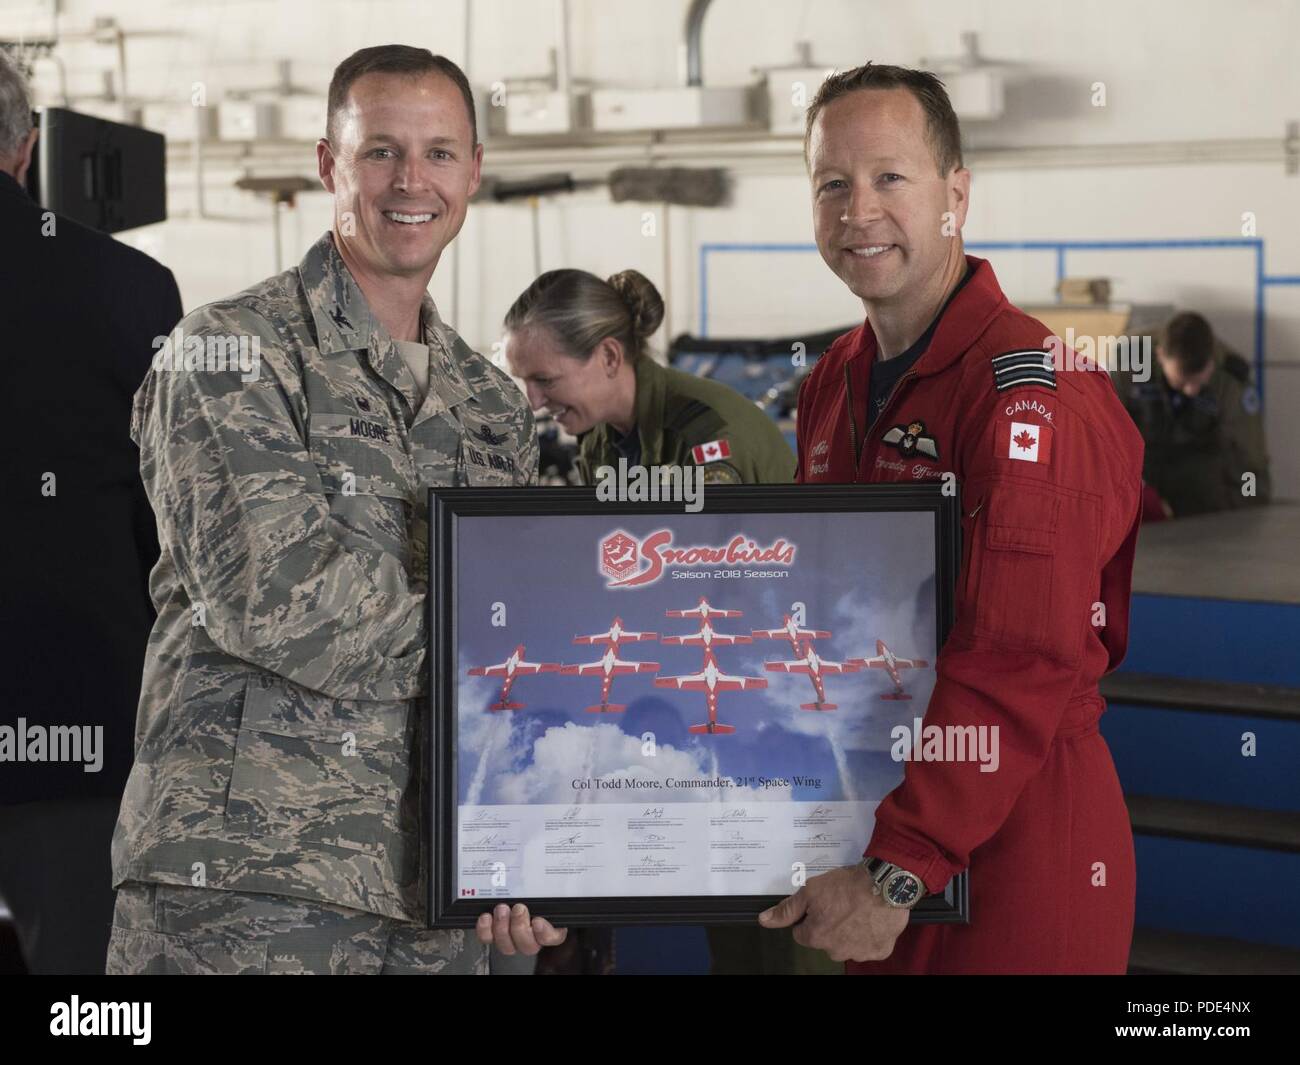 Lt. Col. Mike French (right), commander of the Royal Canadian Air Force’s Snowbirds, presents Col. Todd Moore(left), 21st Space Wing commander, with a lithograph at the North American Aerospace Defense Command's 60th Anniversary Ceremony on Peterson Air Force Base Colorado, May 12, 2018. The ceremony and static display of various NORAD aircraft was the culmination of a three-day event, which included a media tour of Cheyenne Mountain Air Force Station, the dedication of a cairn outside the commands' headquarters building memorializing the Canadians who have passed away while serving NORAD, and Stock Photo